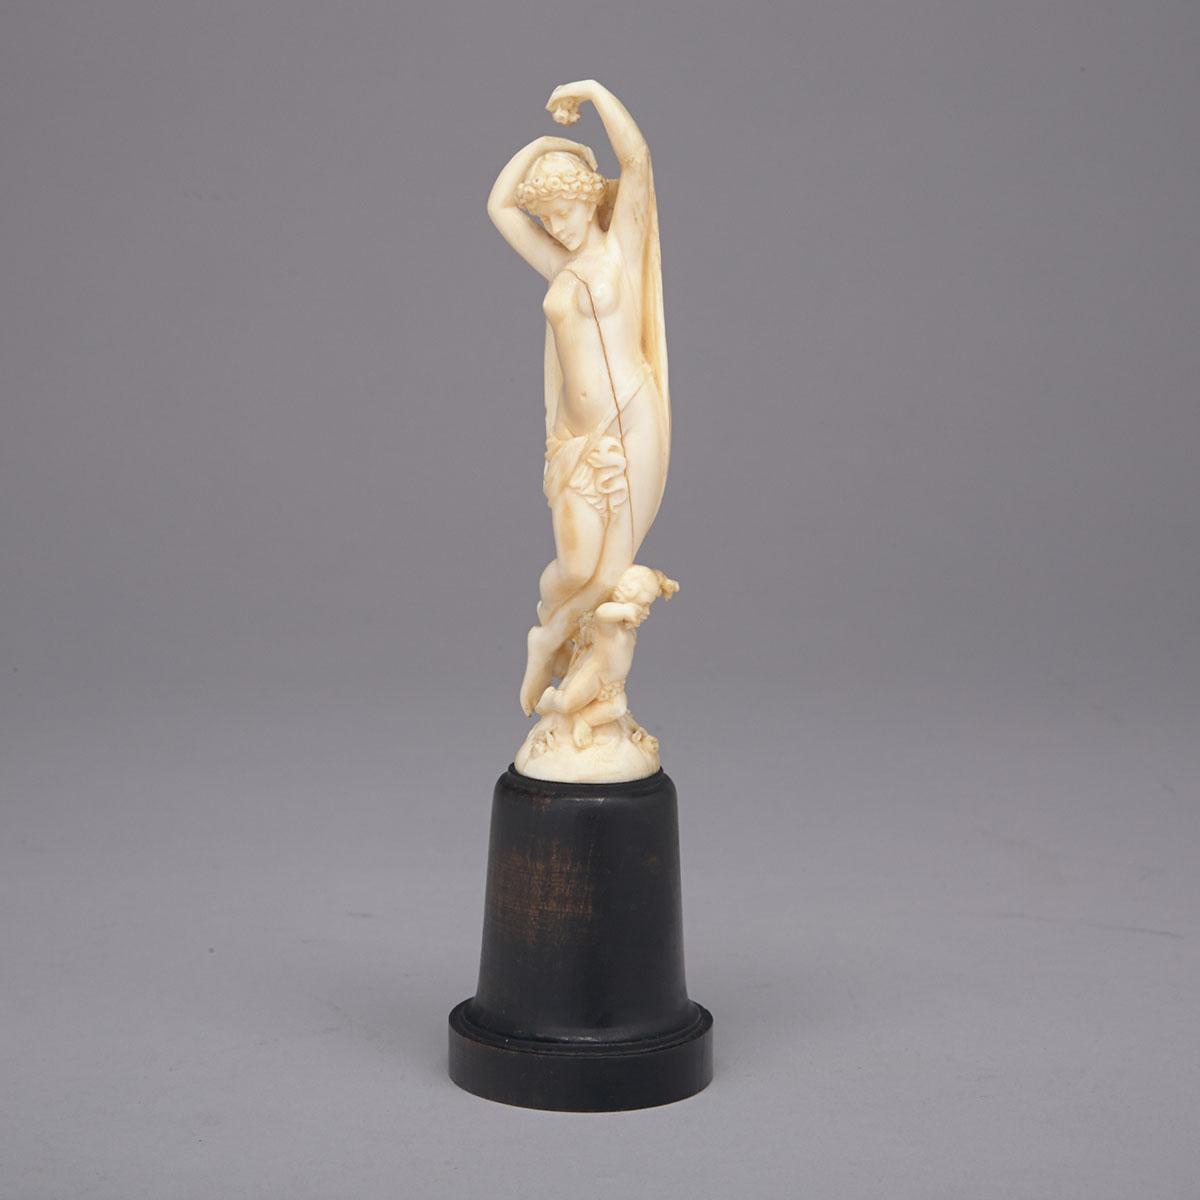 Small Continental Carved Ivory Group of a Classical Nude and Cherub, 19th century